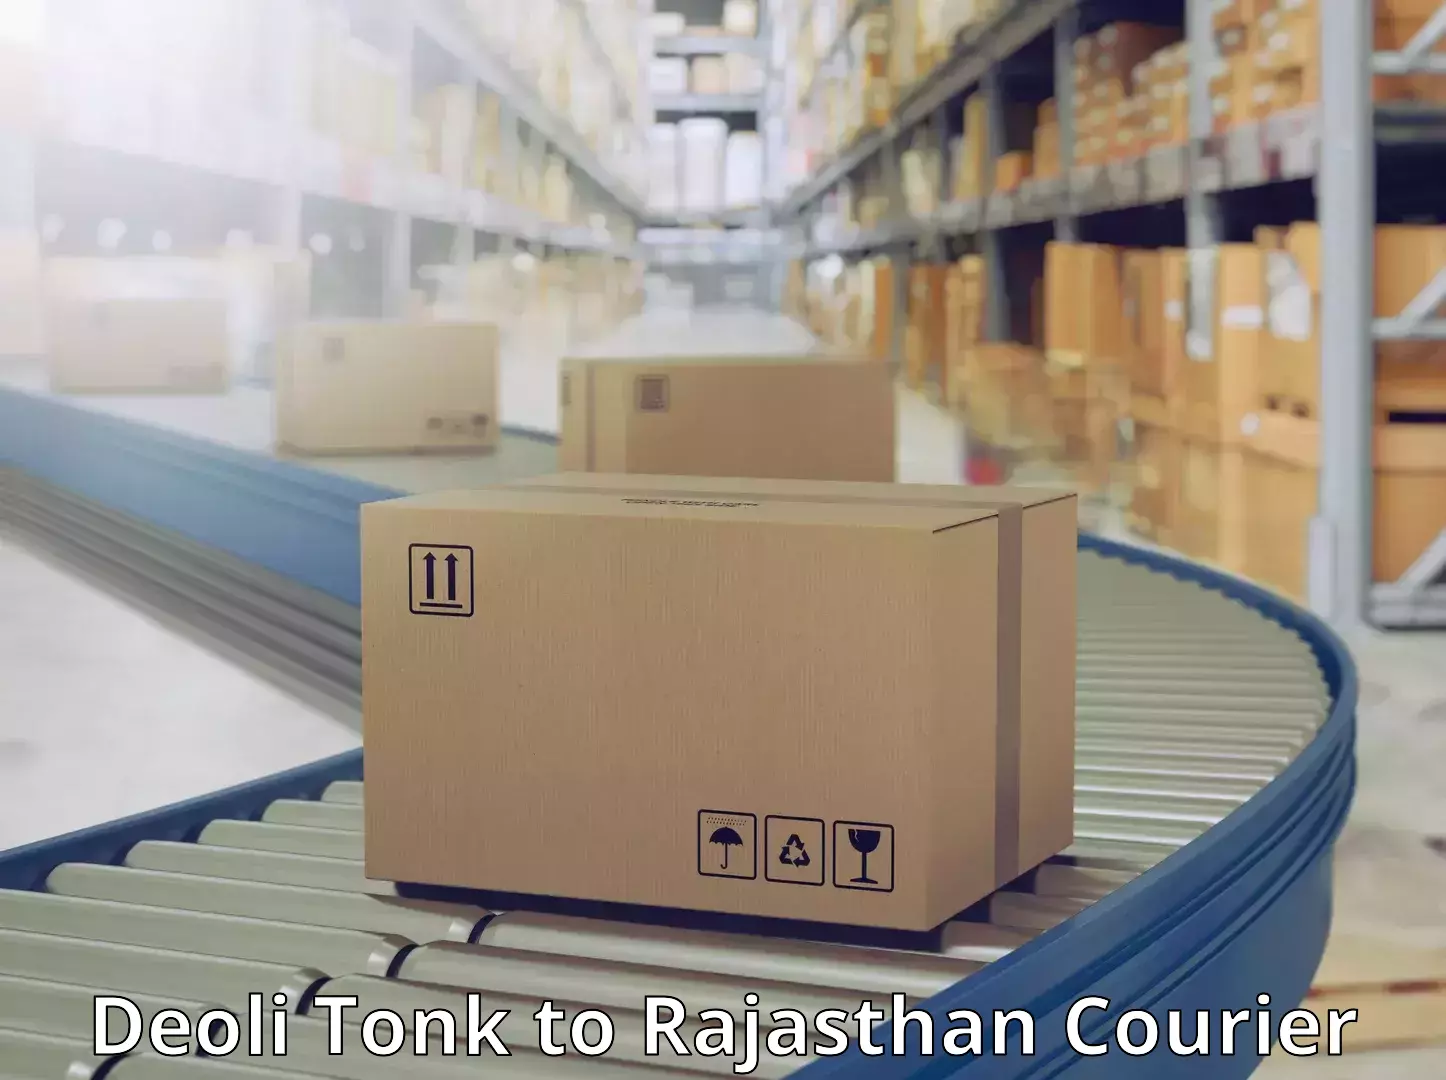 Professional parcel services Deoli Tonk to Rajasthan